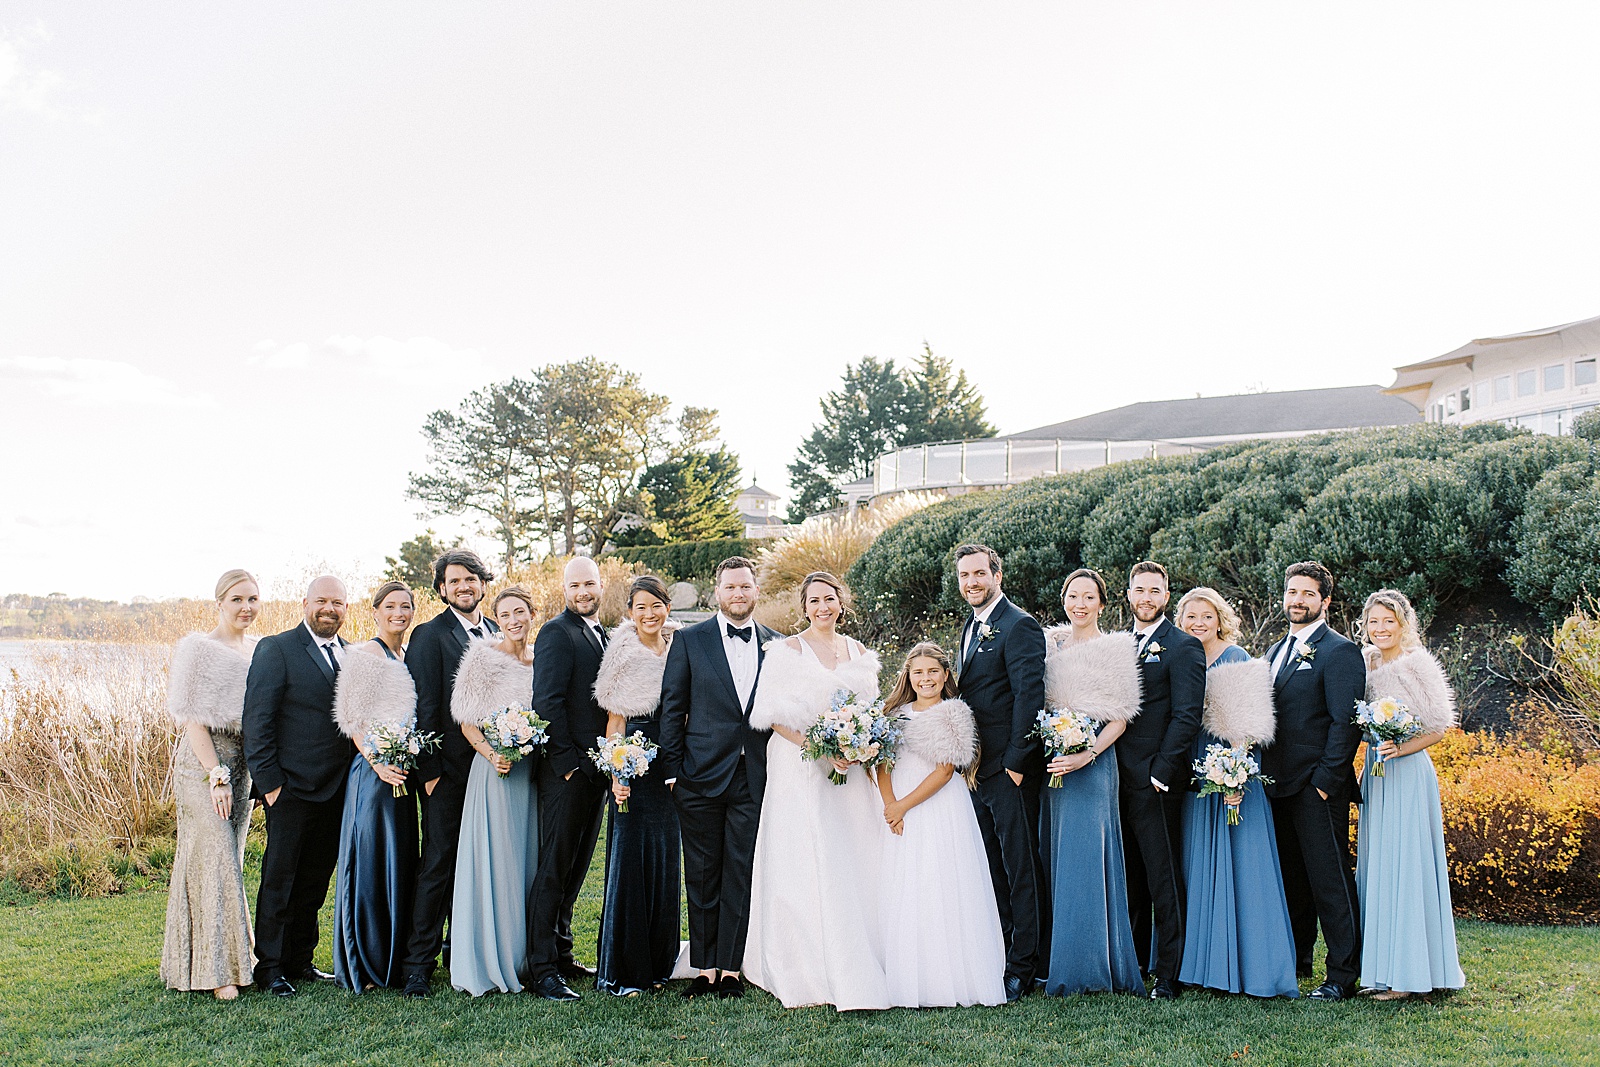 Full wedding party on a lawn in black and blue attire